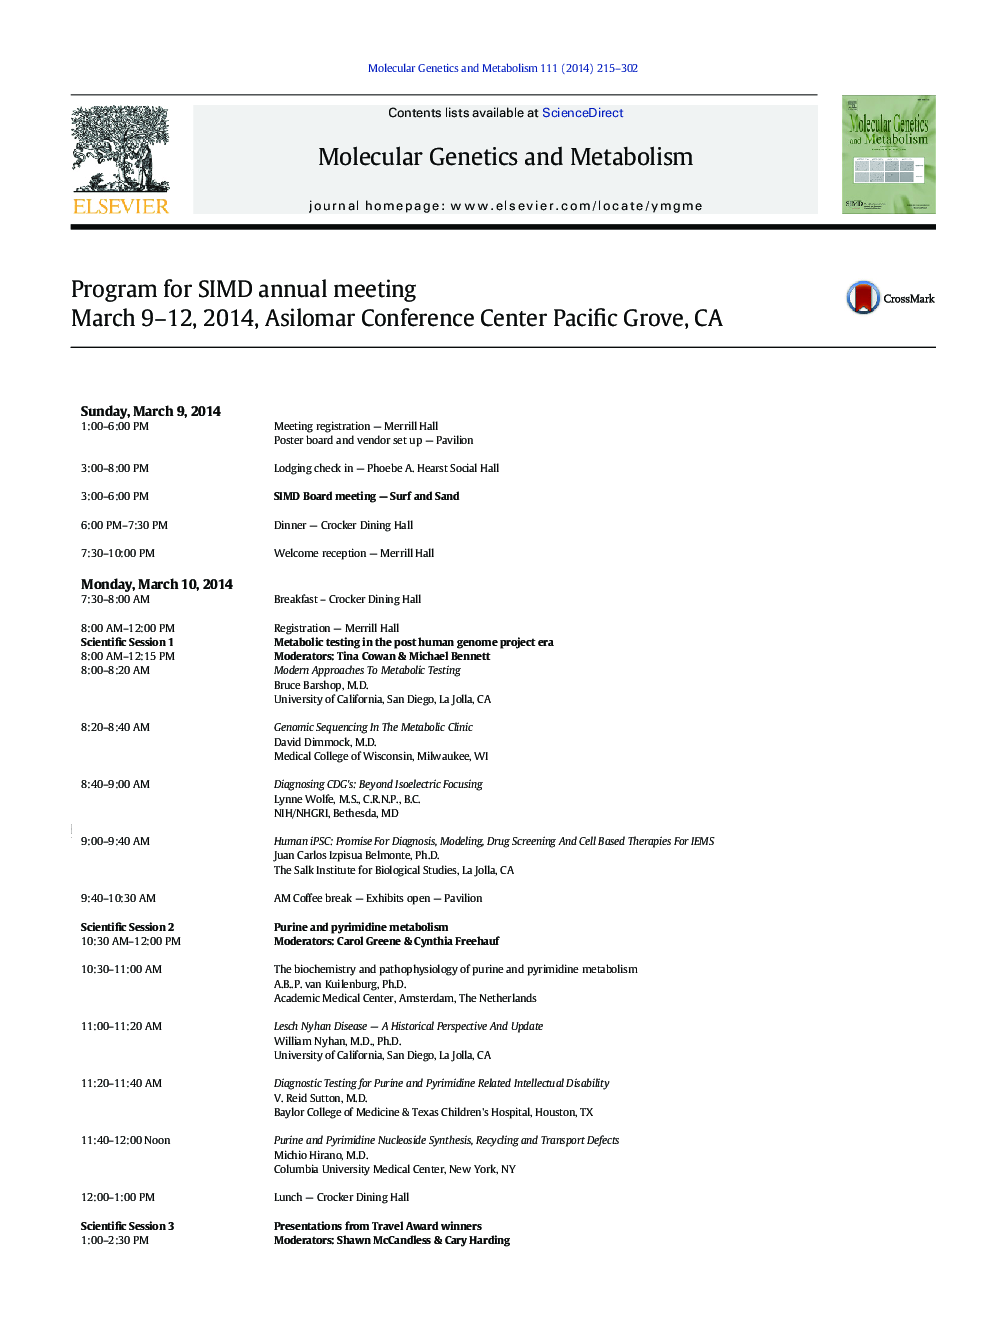 Program and Abstracts for the SIMD Annual Meeting